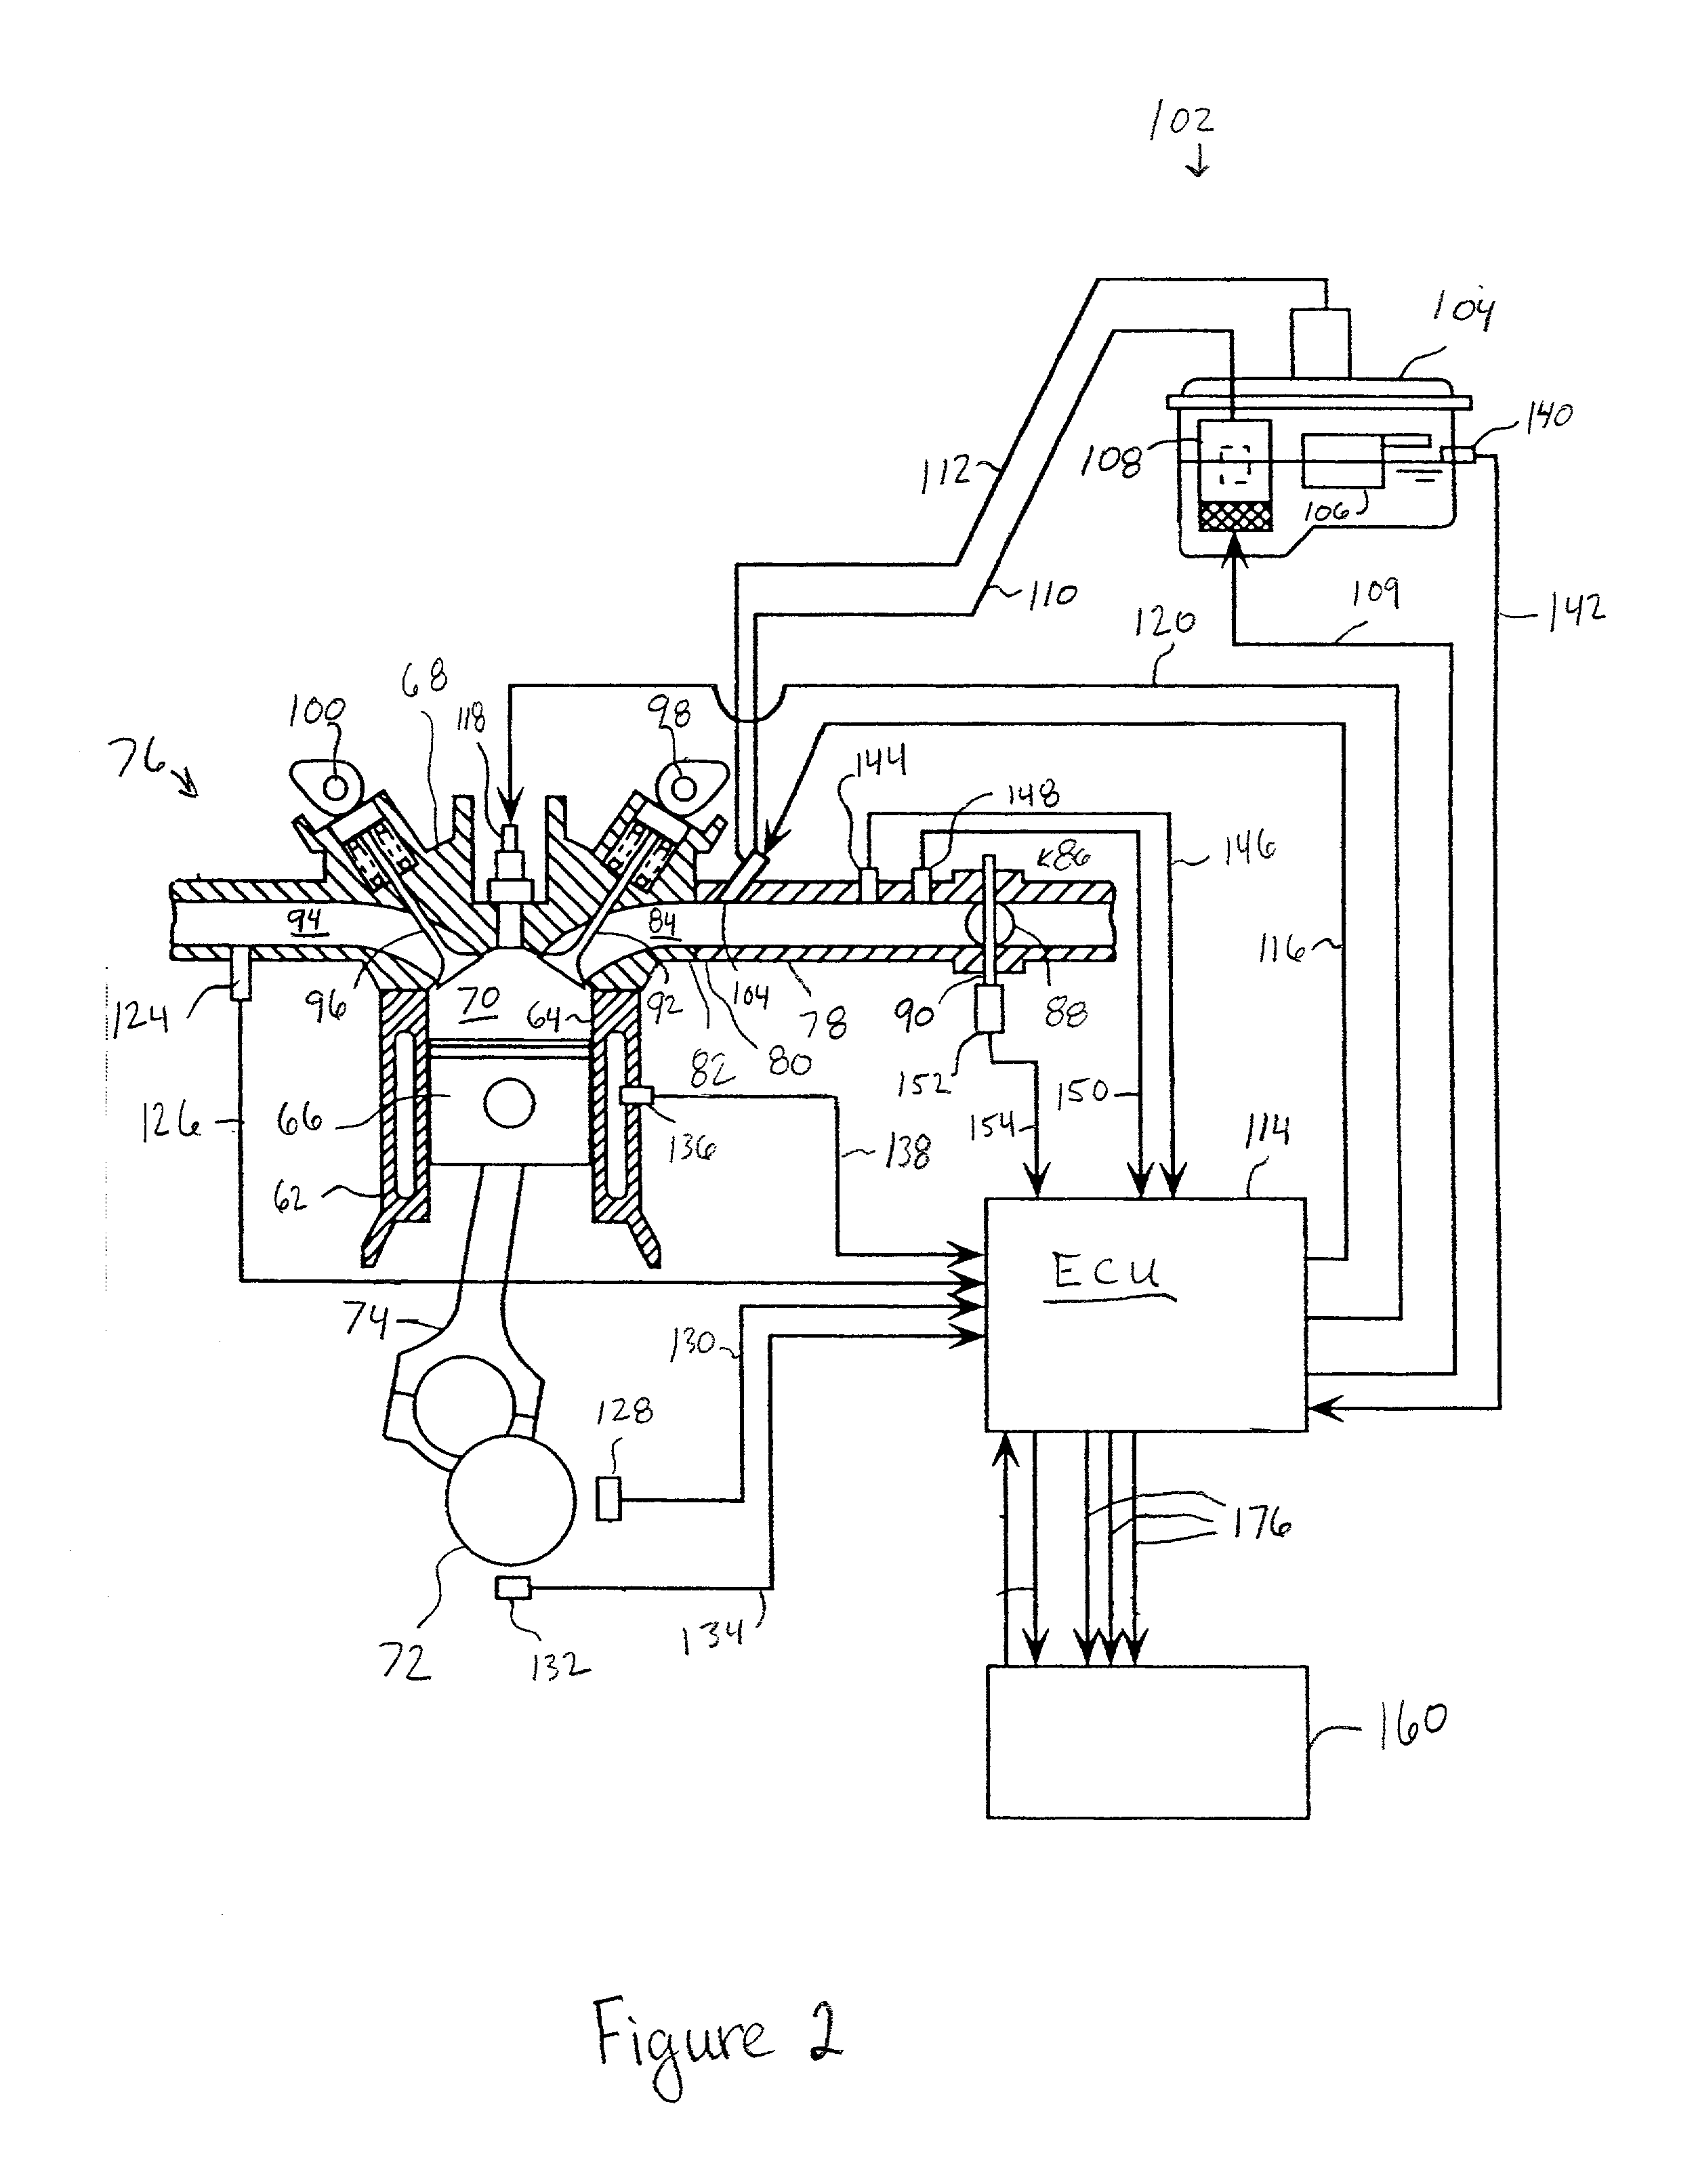 Engine control unit for water vehicle